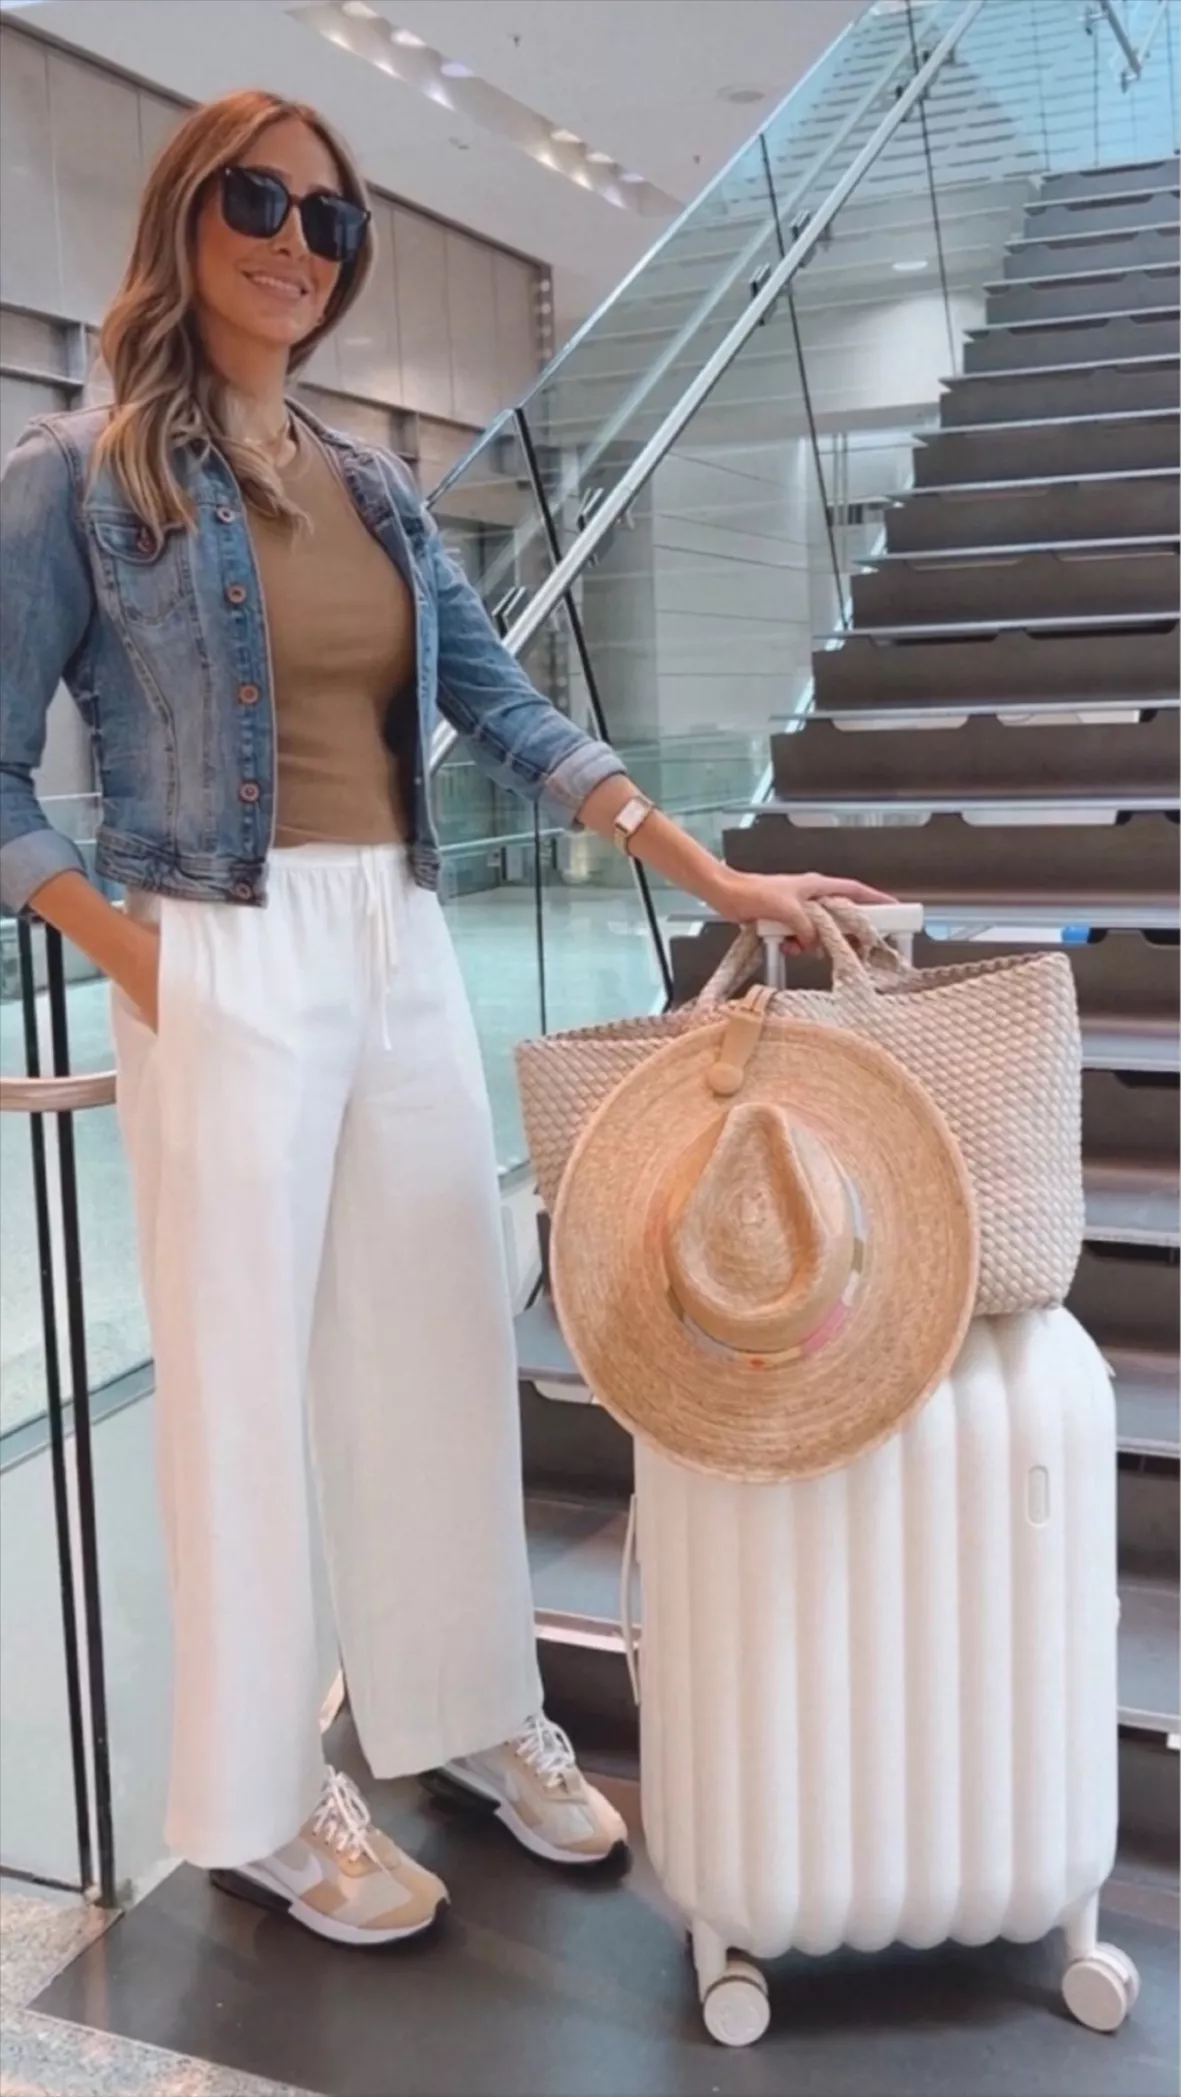 15 airport outfit ideas to wear in 2019 - Fashion Inspiration and